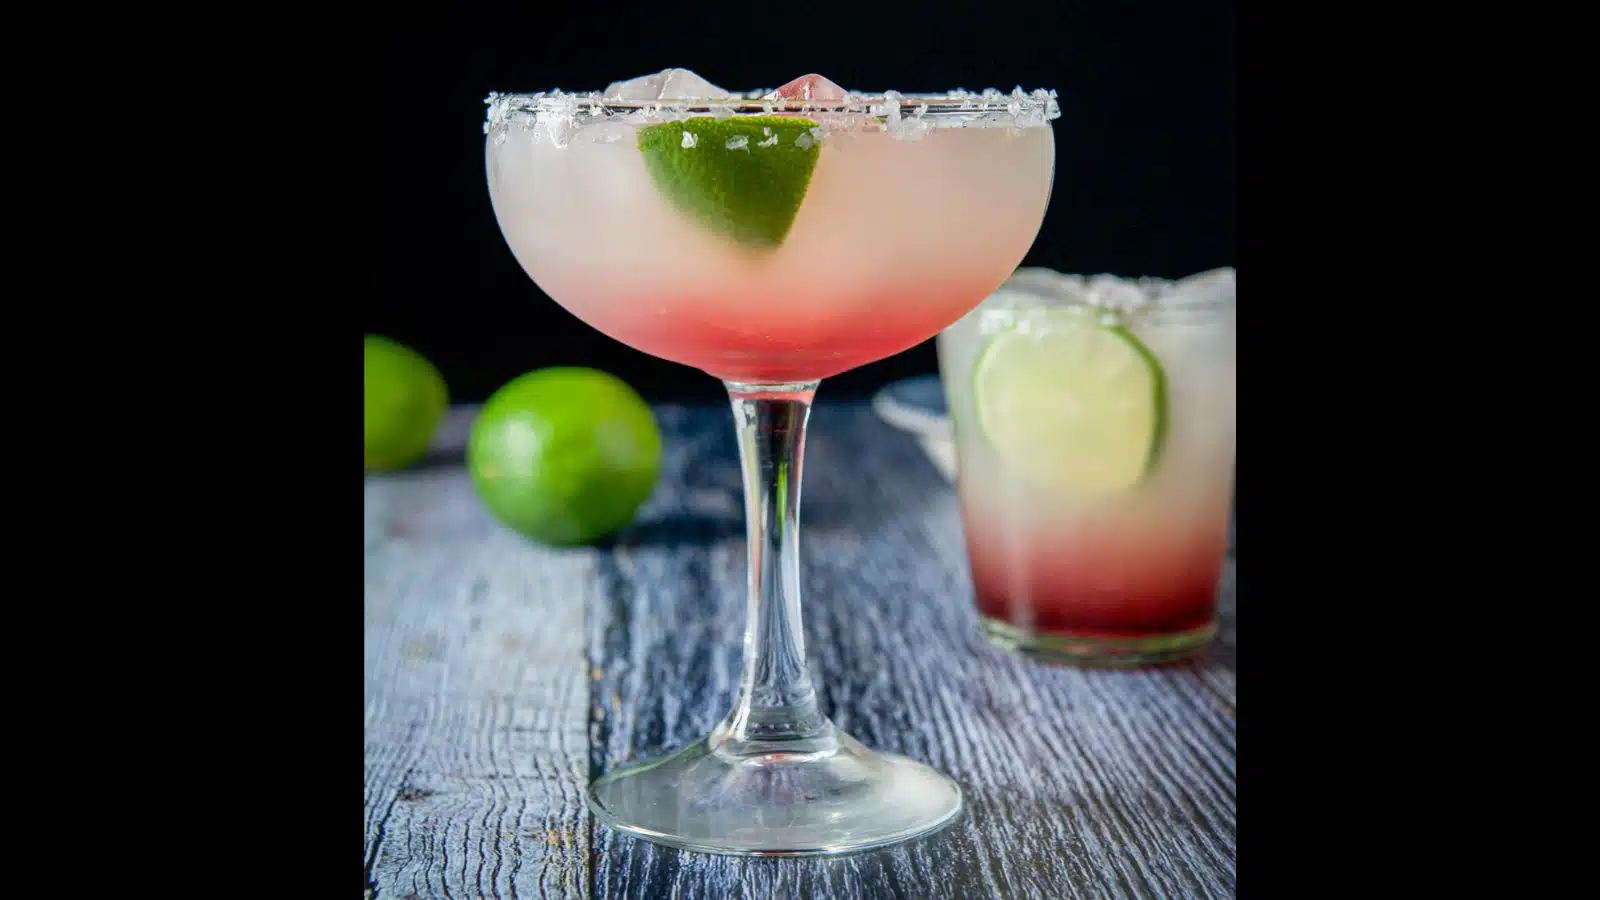 A bowl glass and a double old-fashioned glass filled with a two-toned margarita with limes as garnish